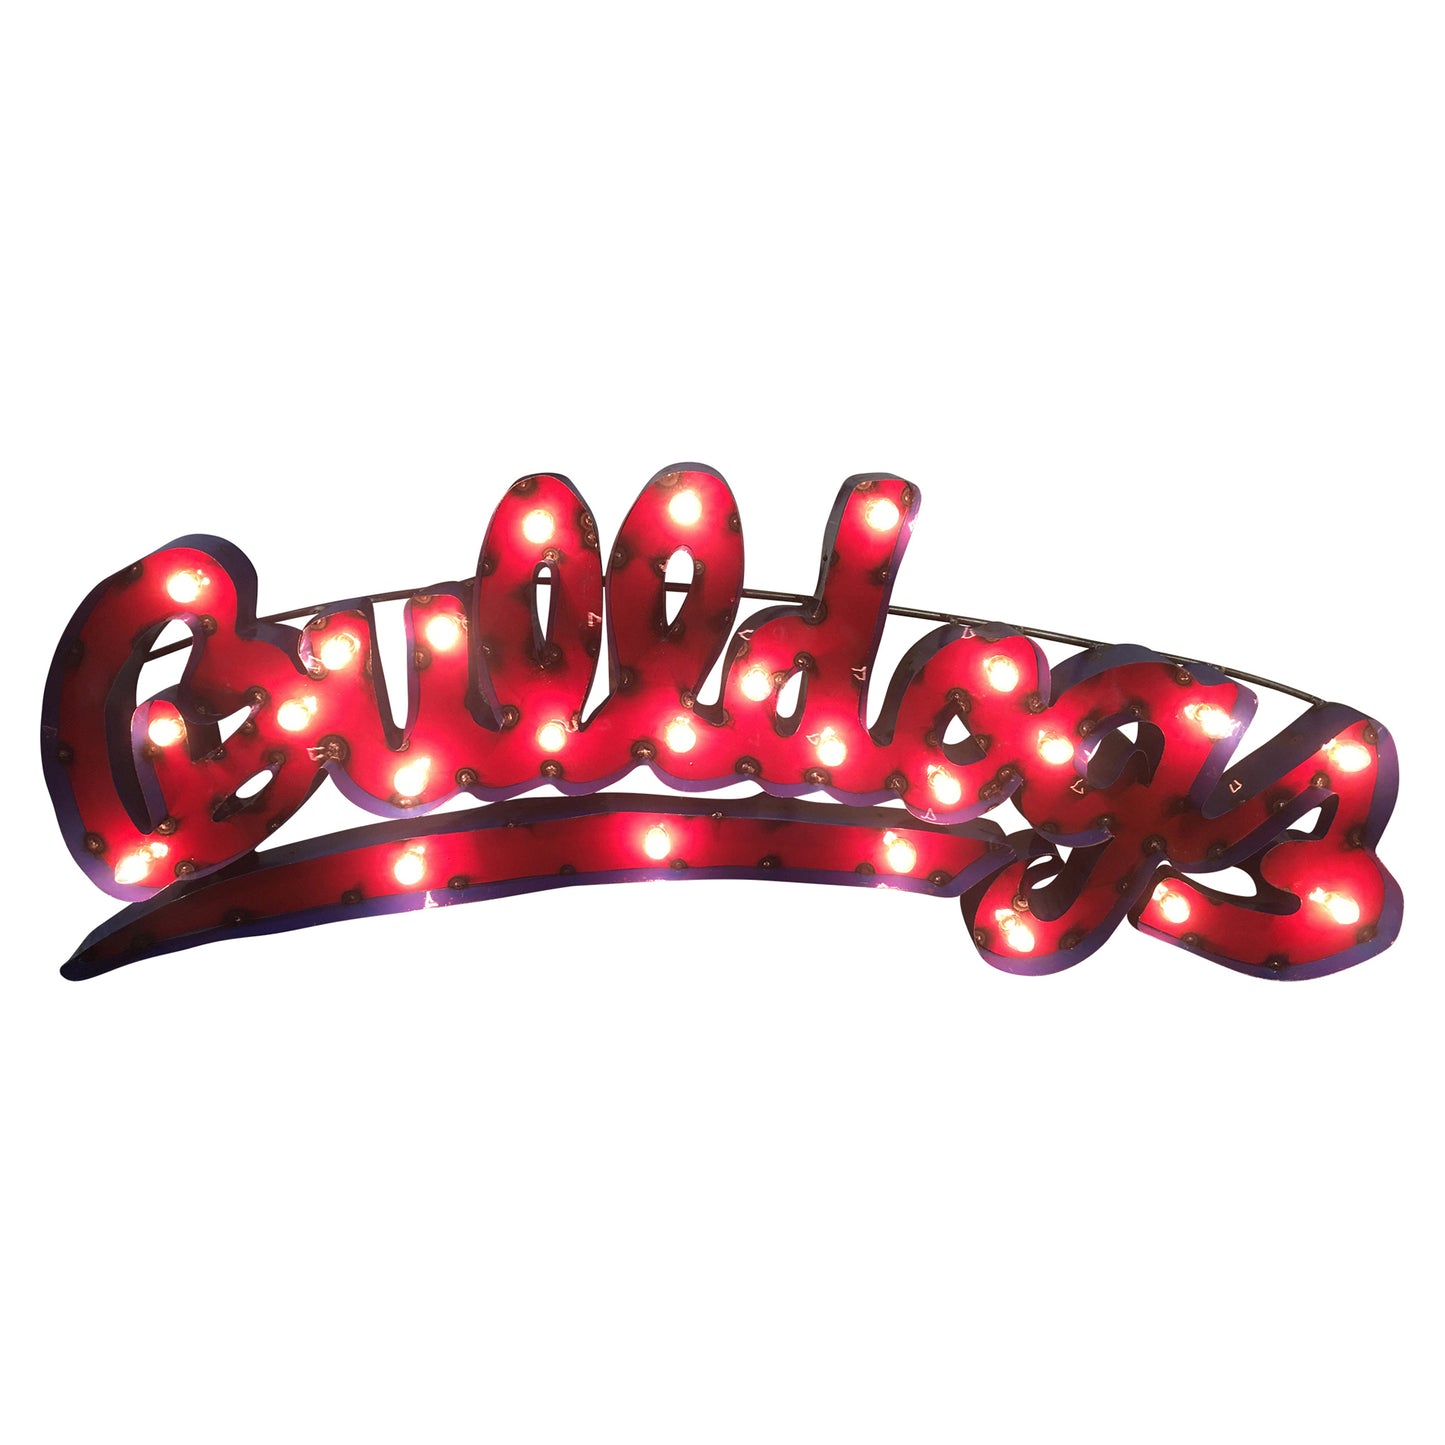 Fresno State "Bulldogs" Lighted Recycled Metal Wall Decor